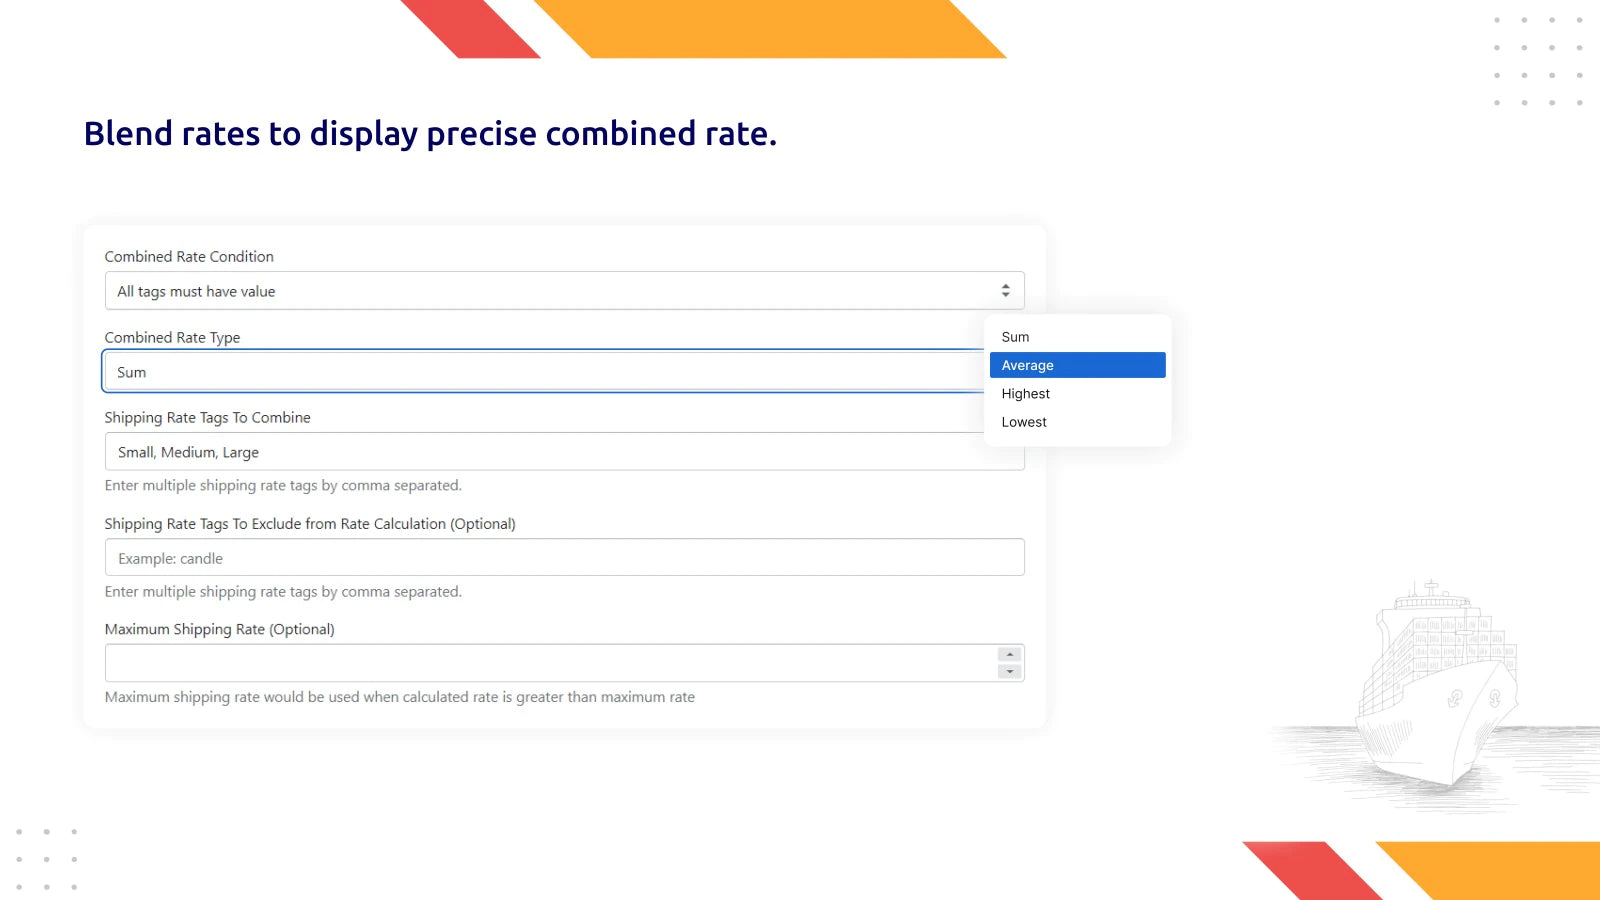 Shipping Rates - Shipeasy you can have blend rates to display with precise combined rate